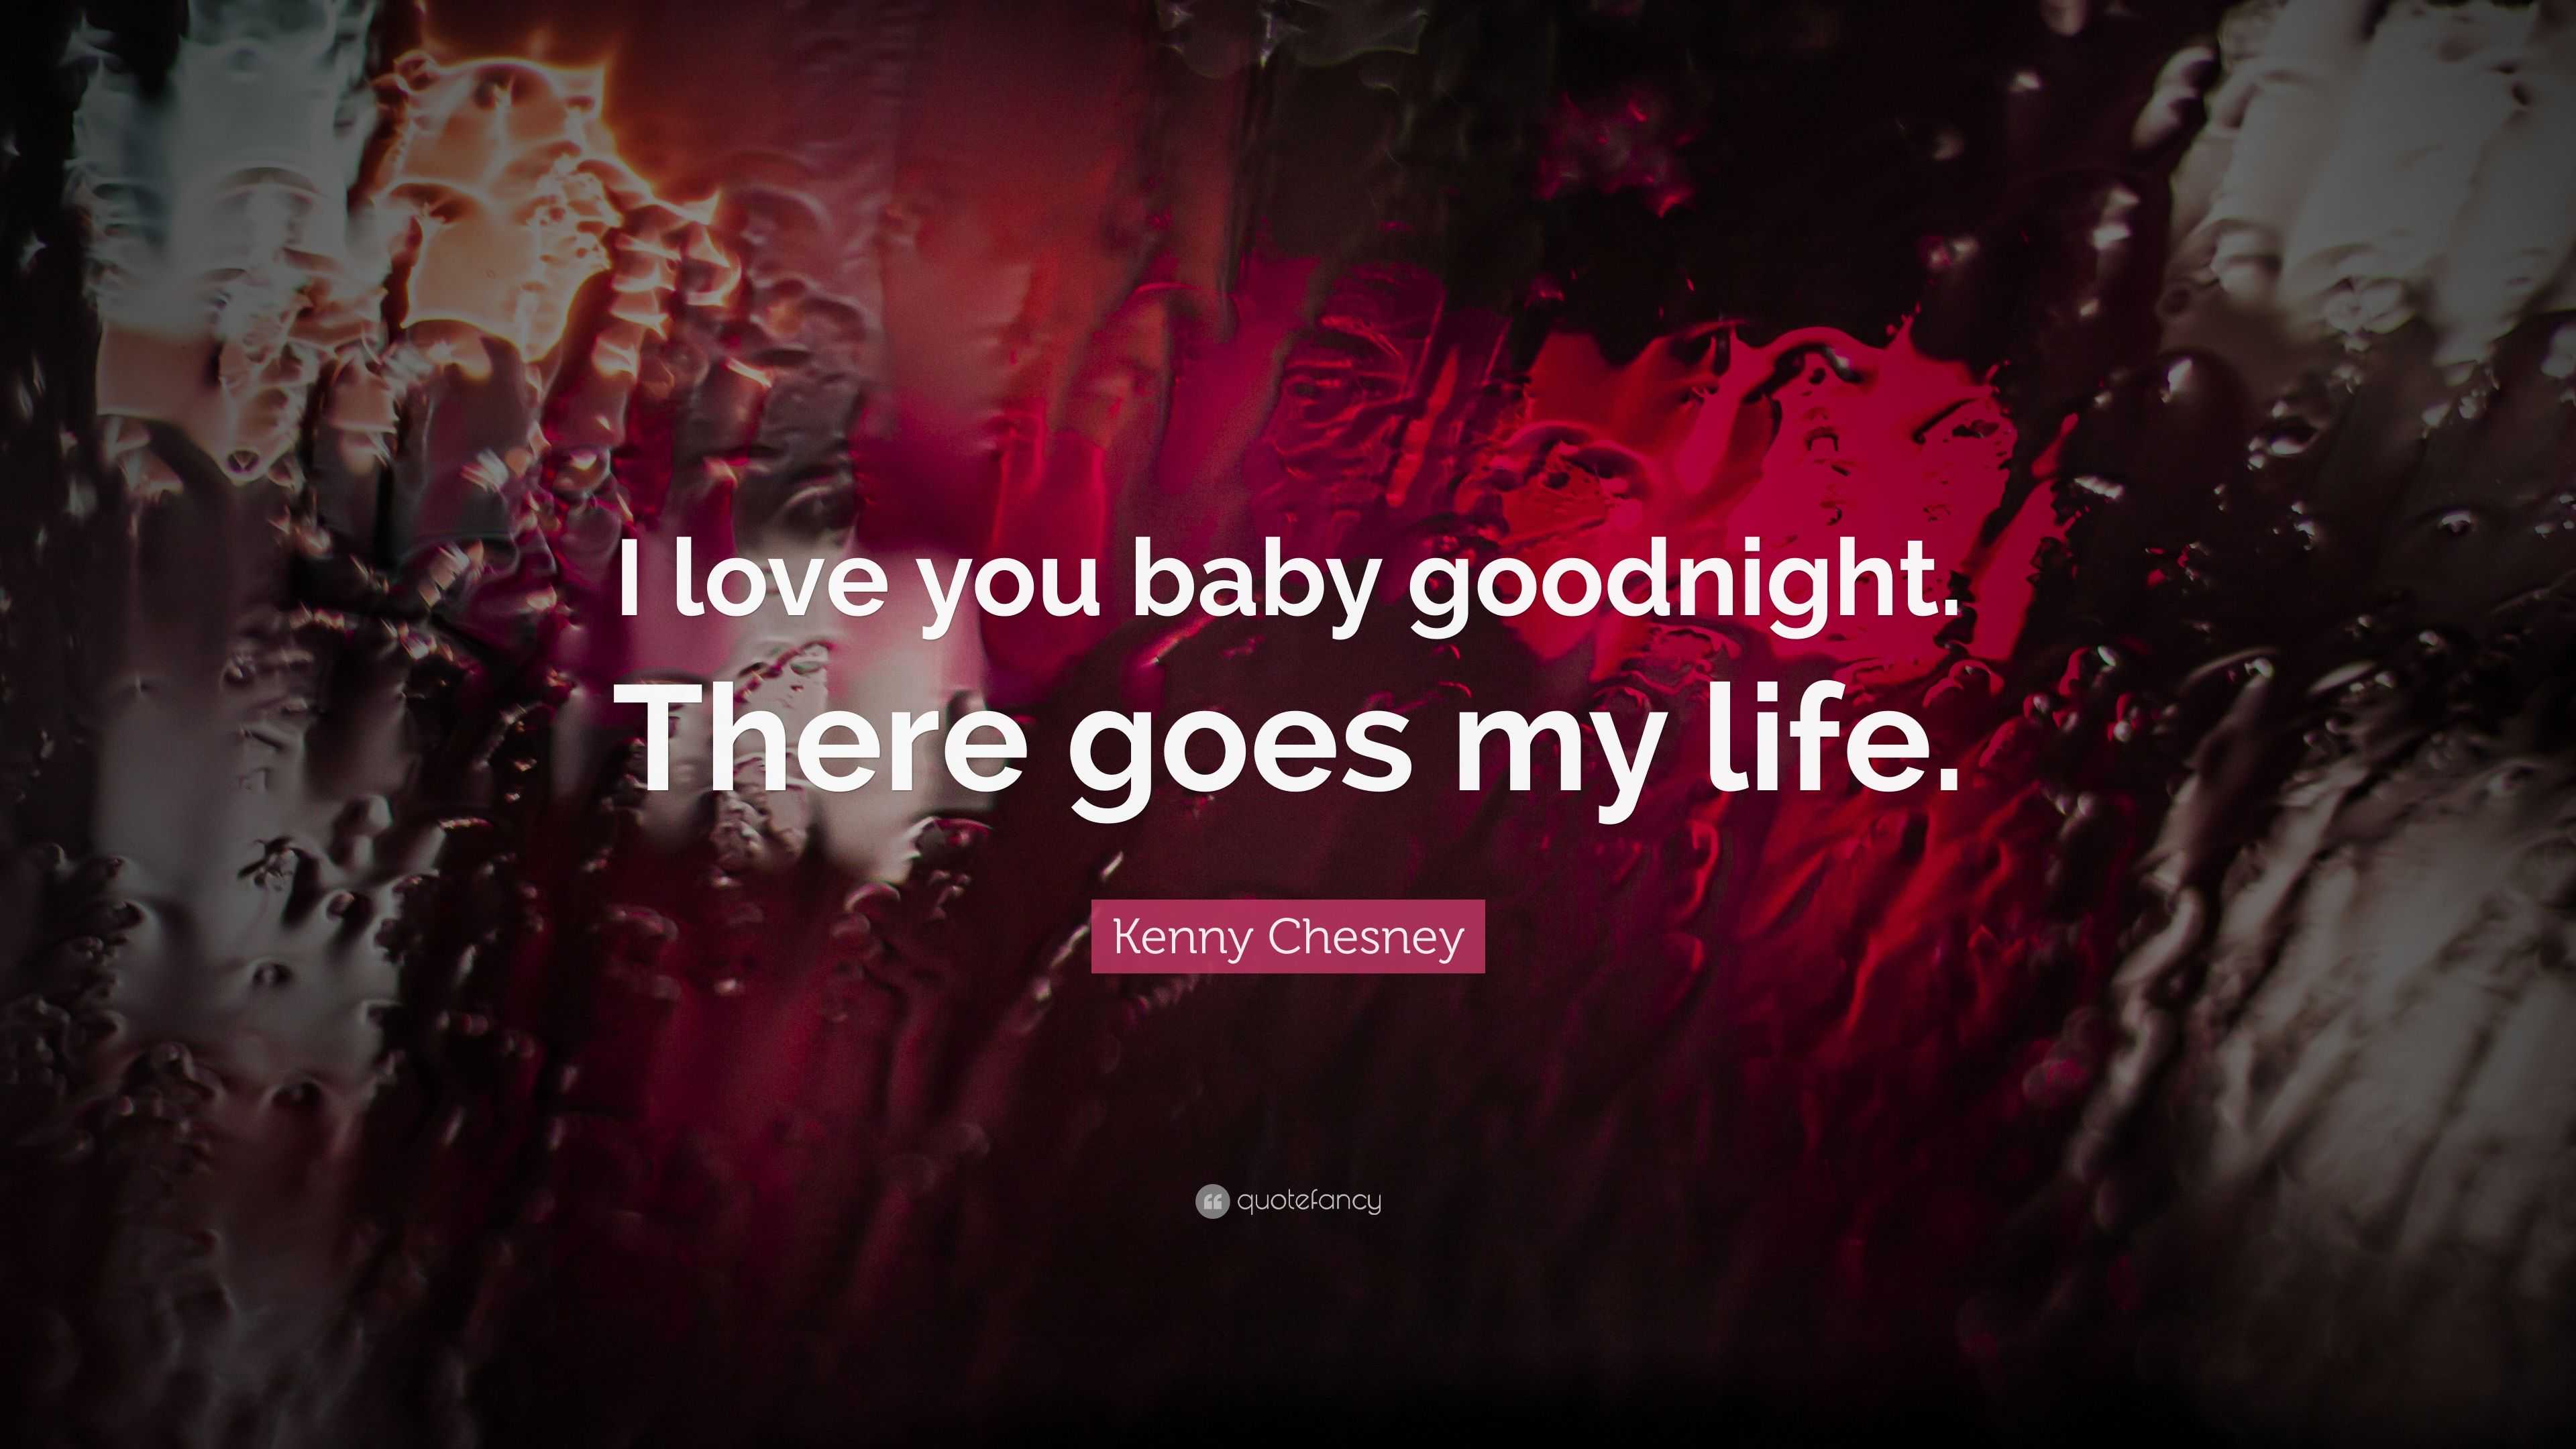 Kenny Chesney Quote: “I love you baby goodnight. There goes my life.”